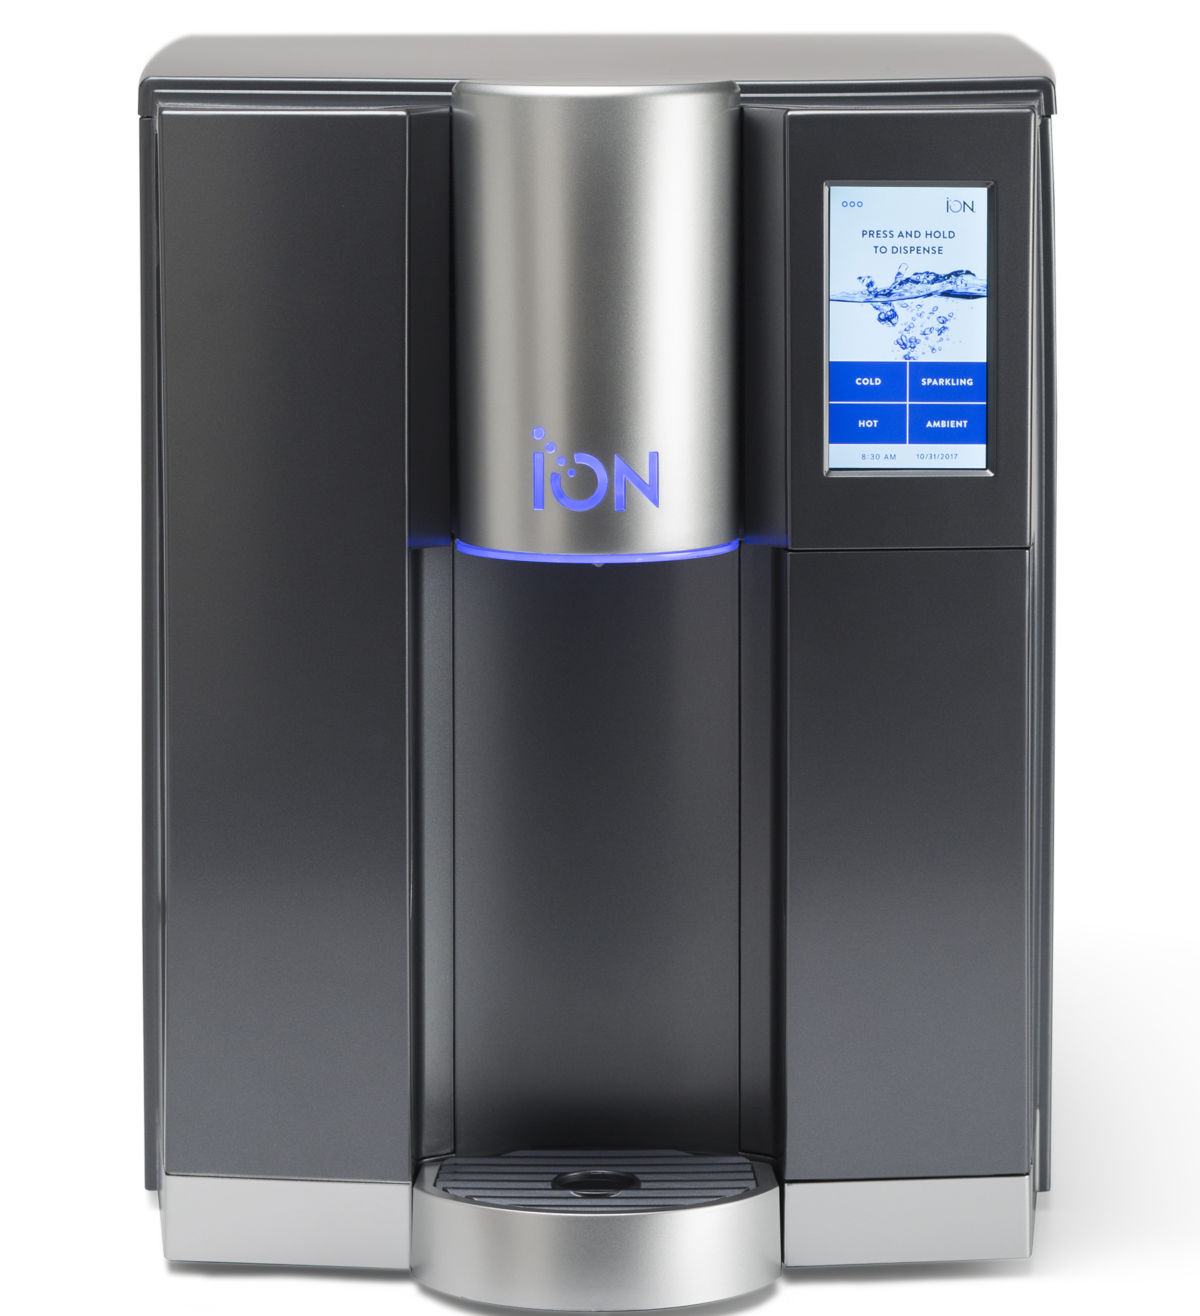 ION M watercooler cold, sparkling, hot and ambient water, charcoal